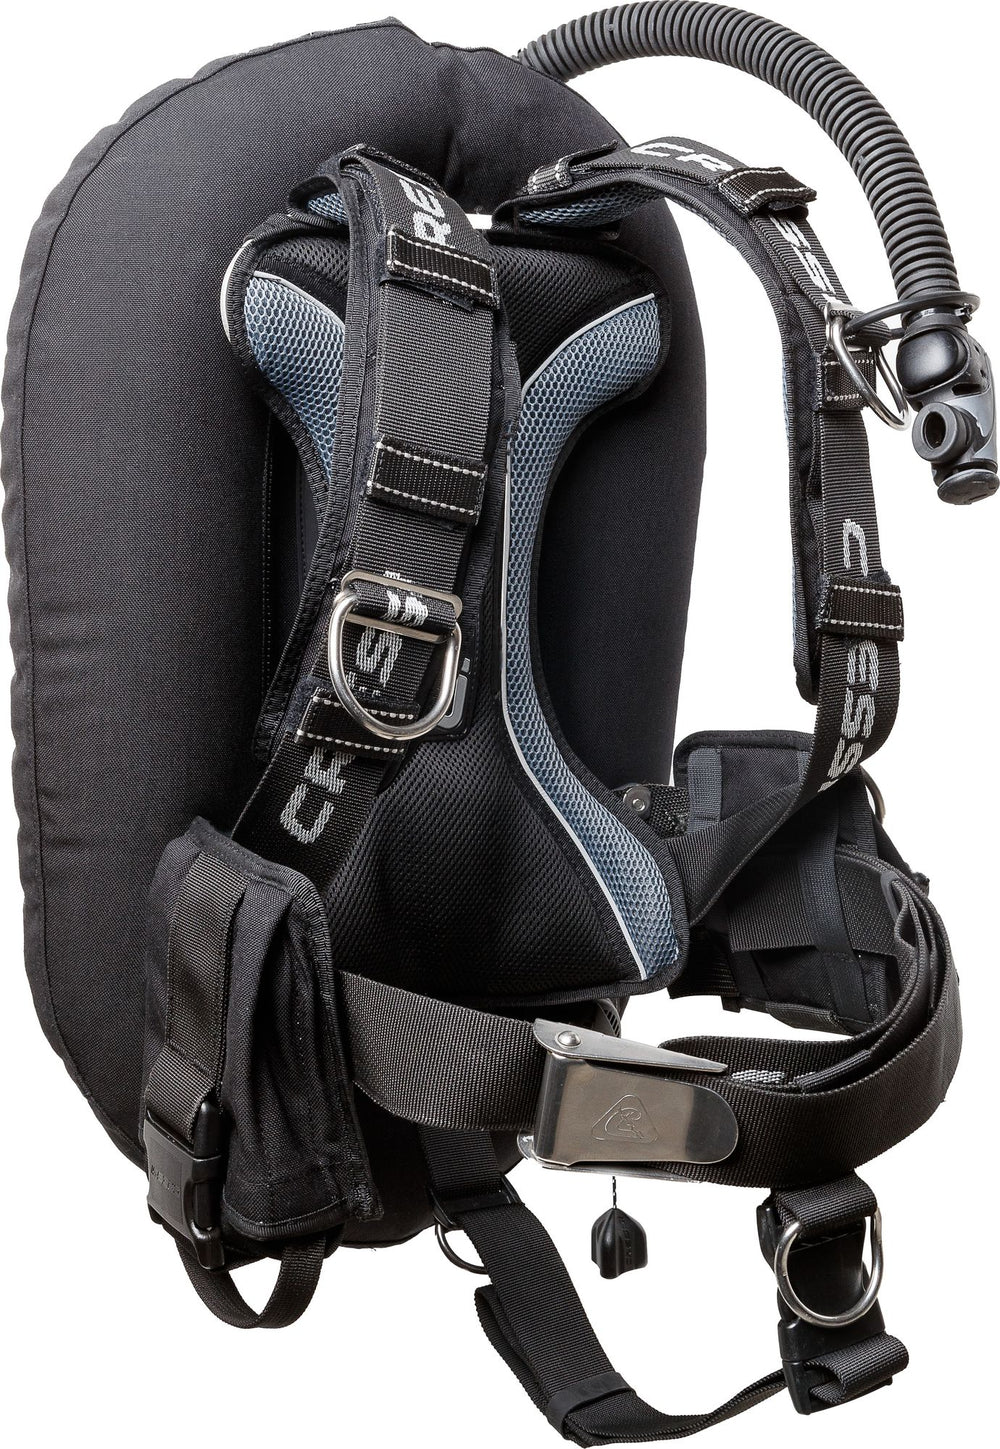 Cressi AQUAWING PLUS Black Plate and Wing BCD